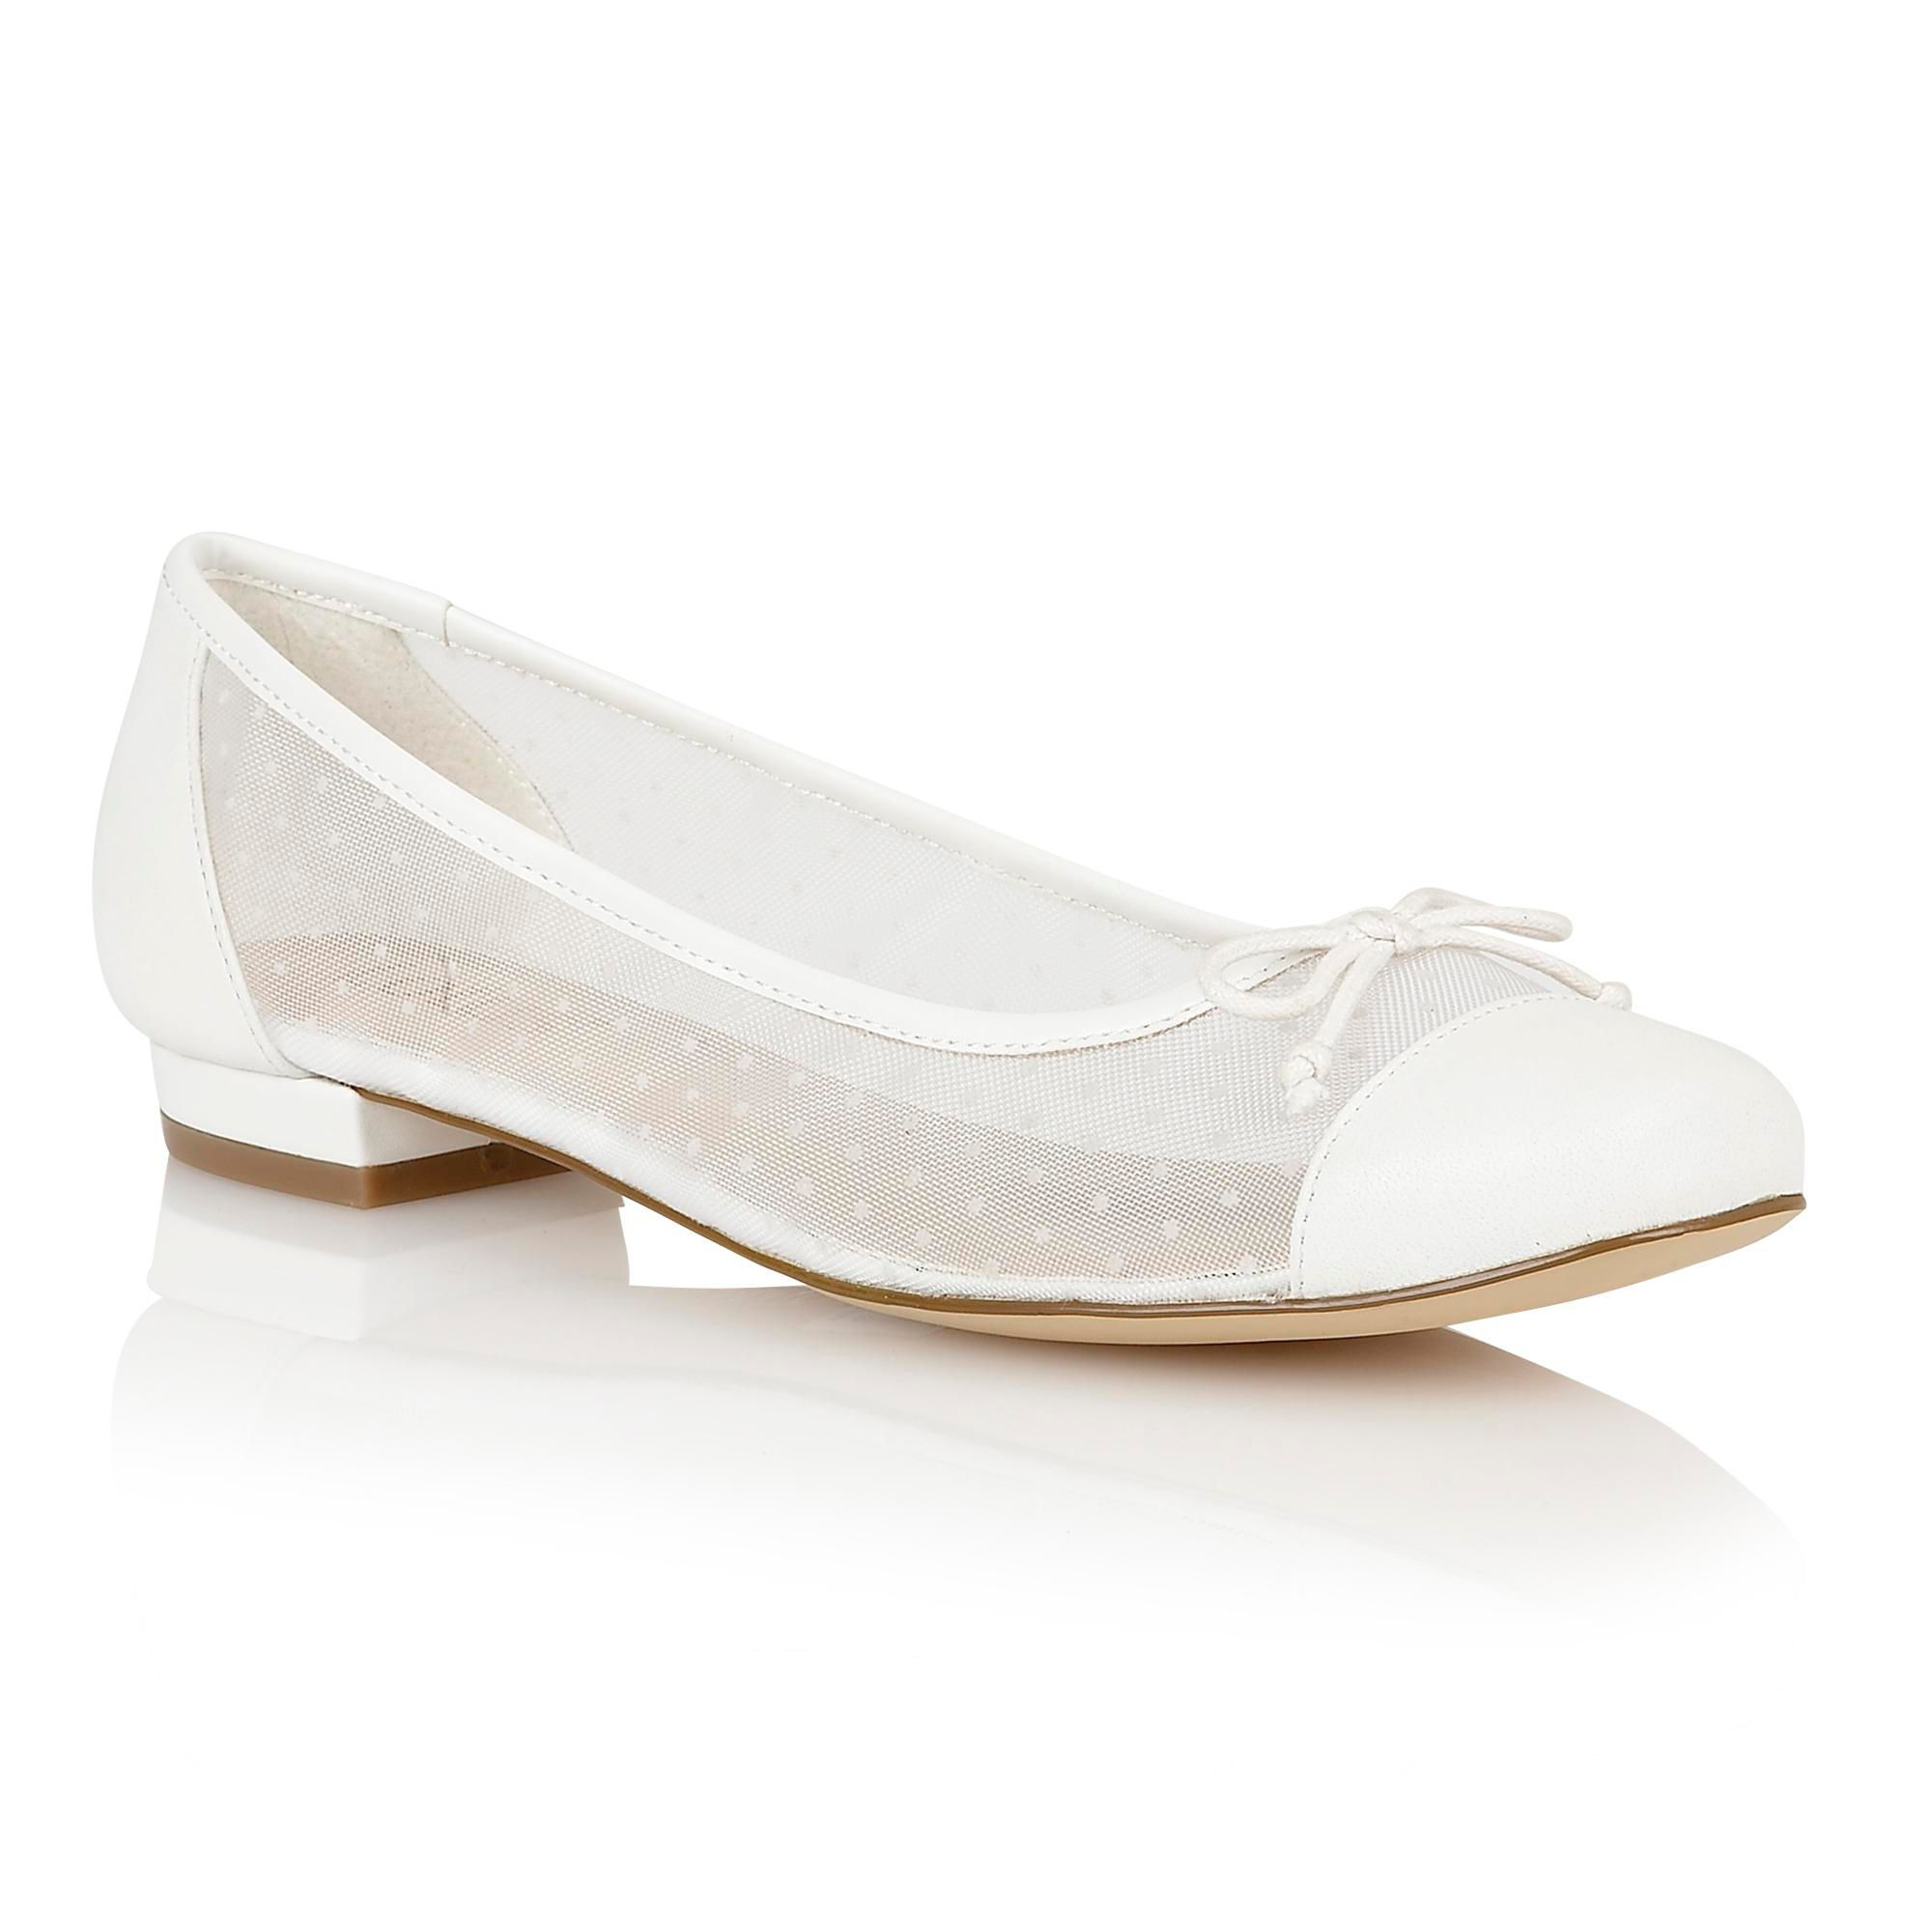 Lotus White Damsel Flat Shoes Product 0 852972131 Normal 